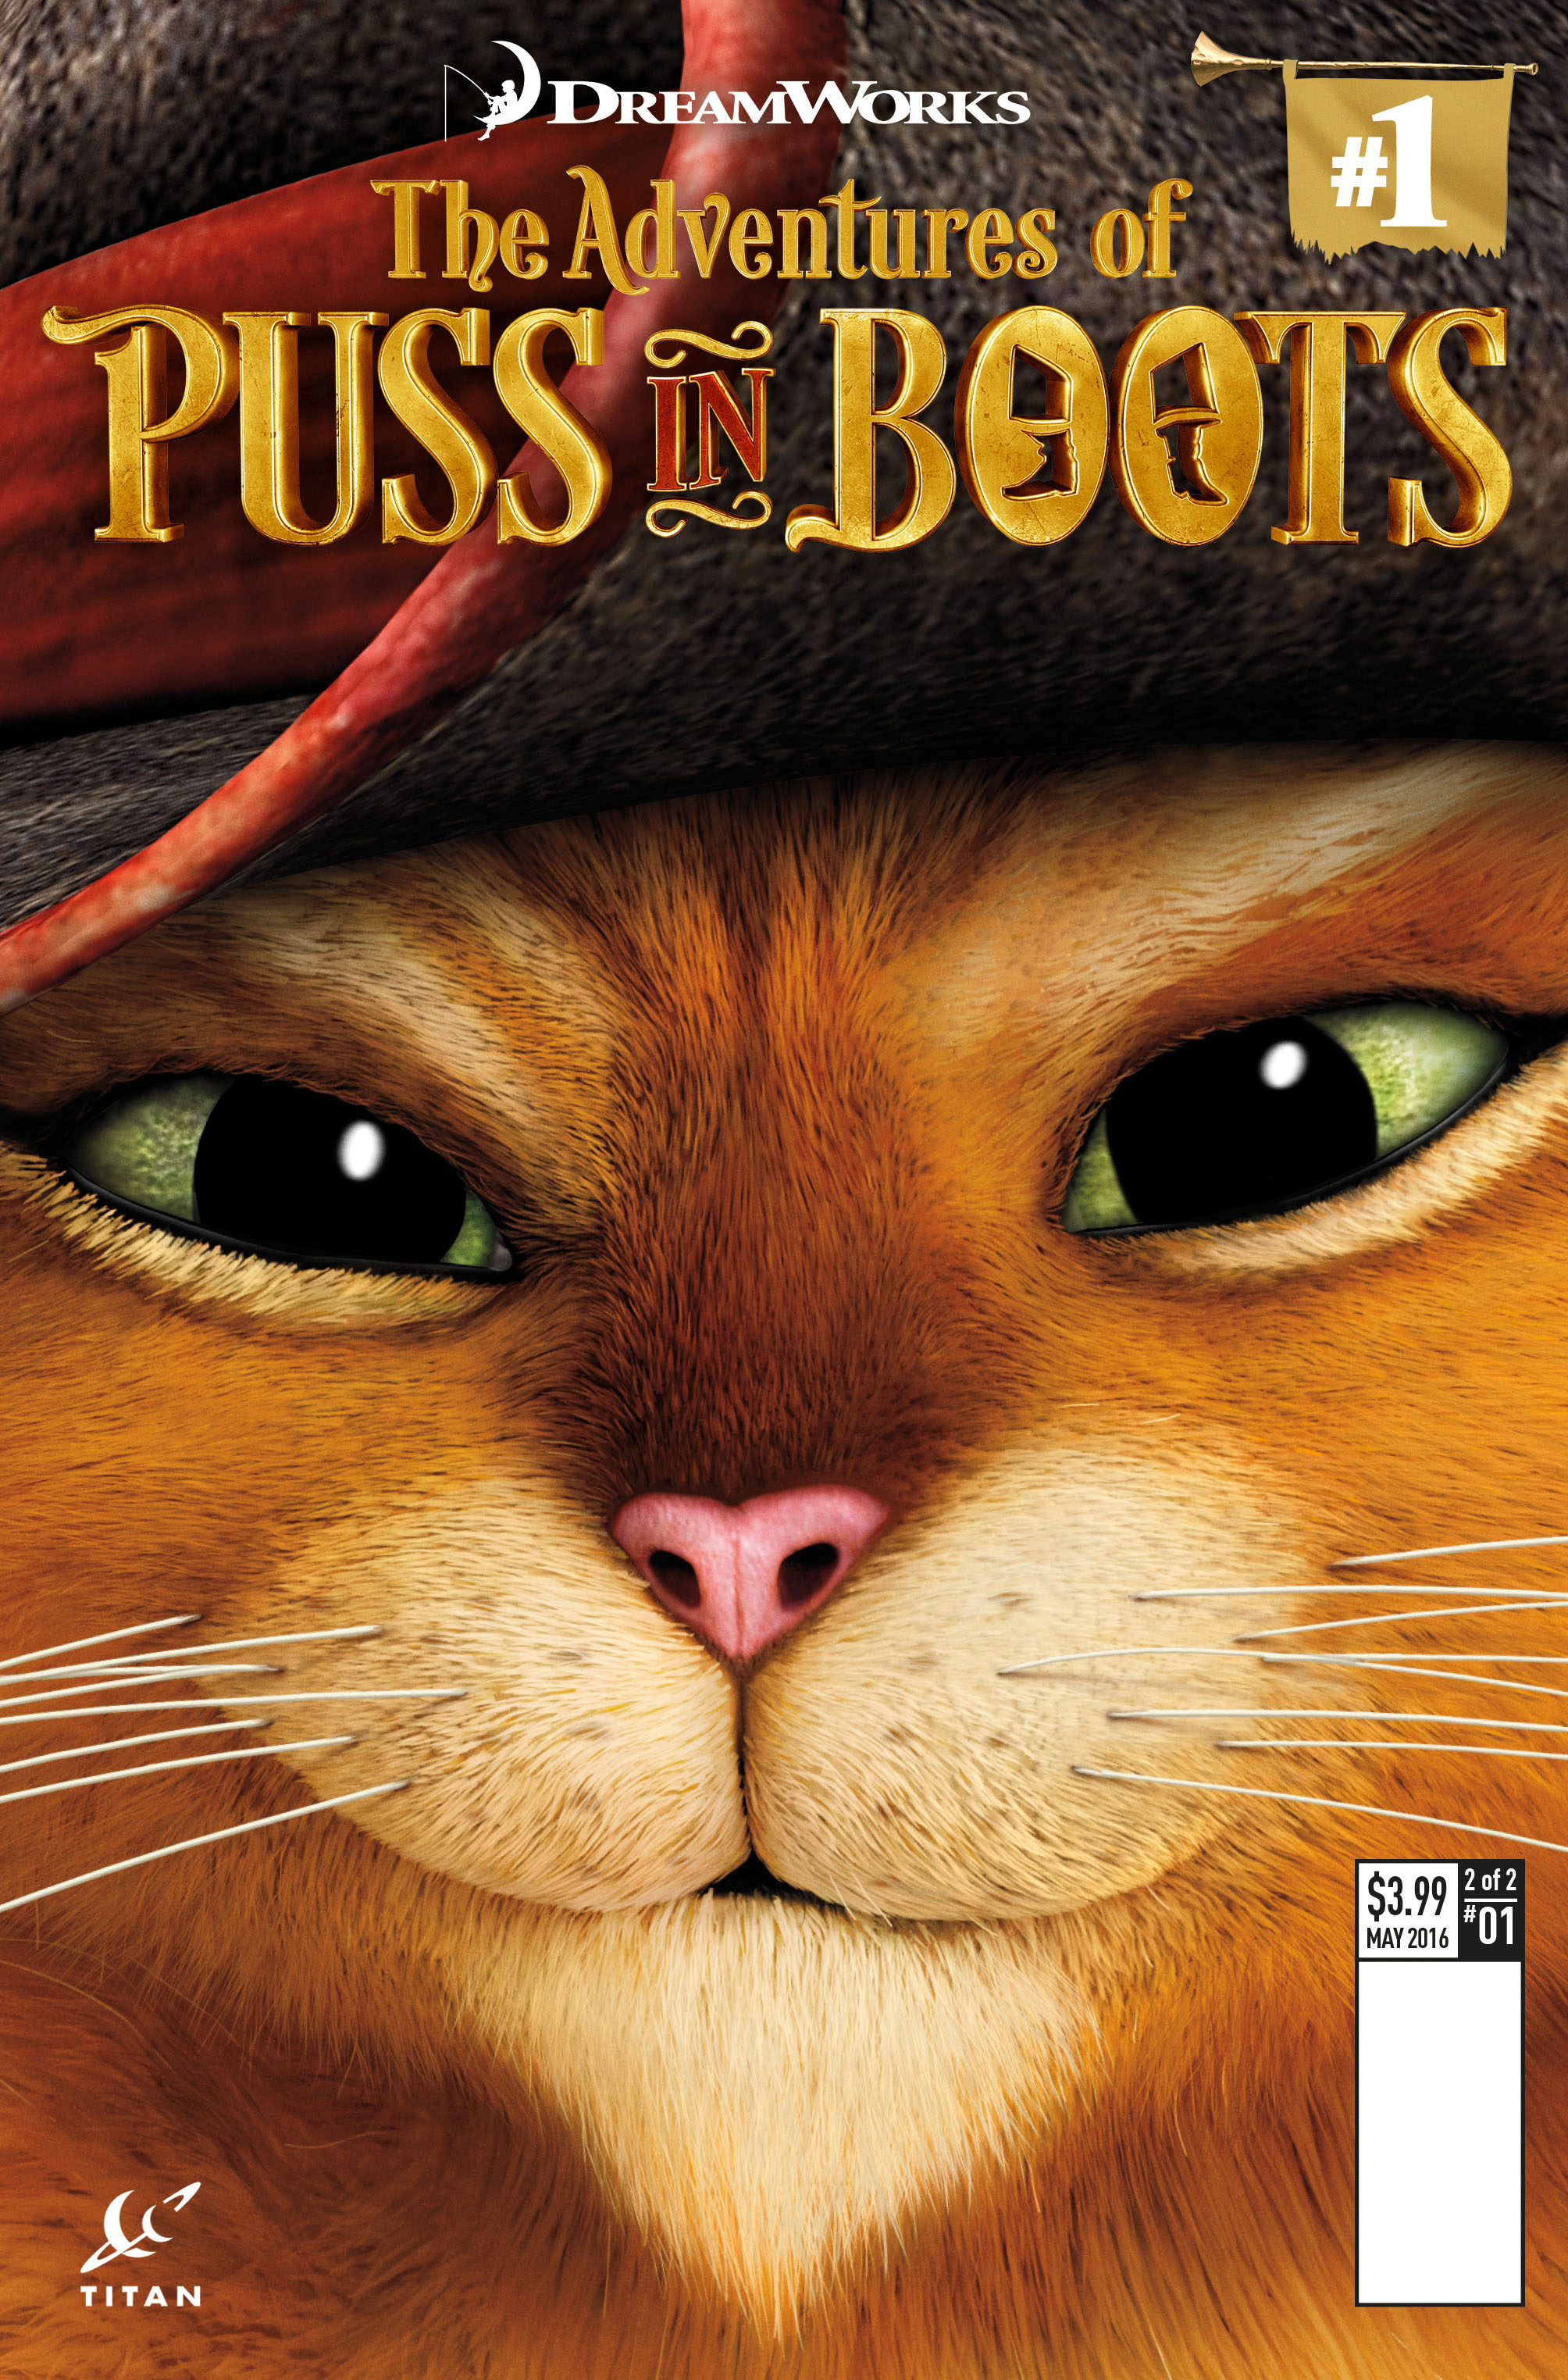 Puss In Boots #1 Film Art Cover